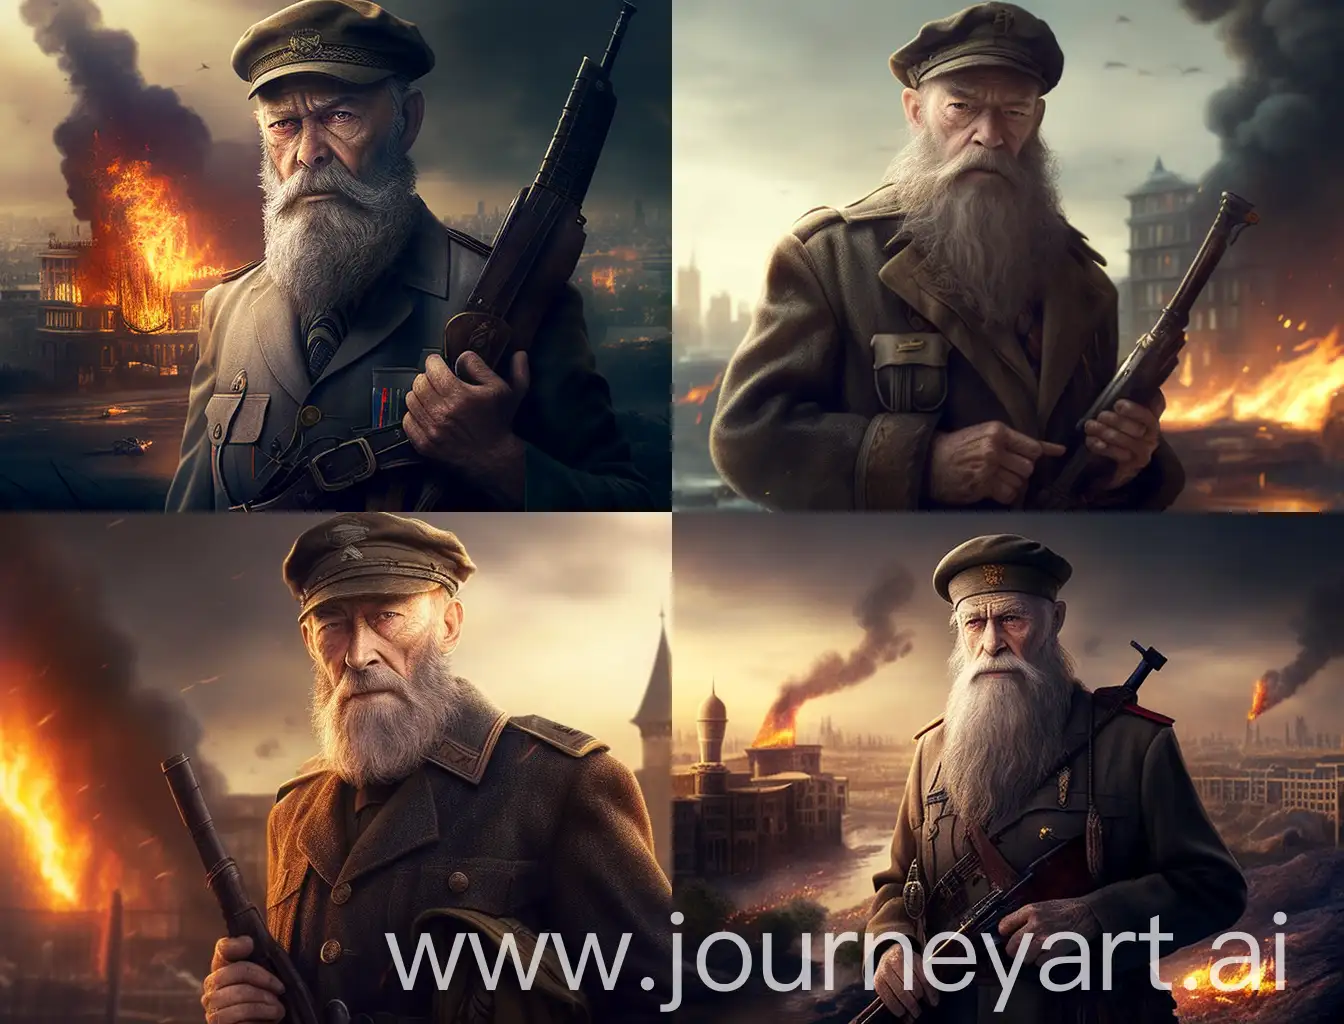 Albus-Dumbledore-in-WW2-American-Military-Uniform-with-Thompson-Gun-in-Burning-Cityscape